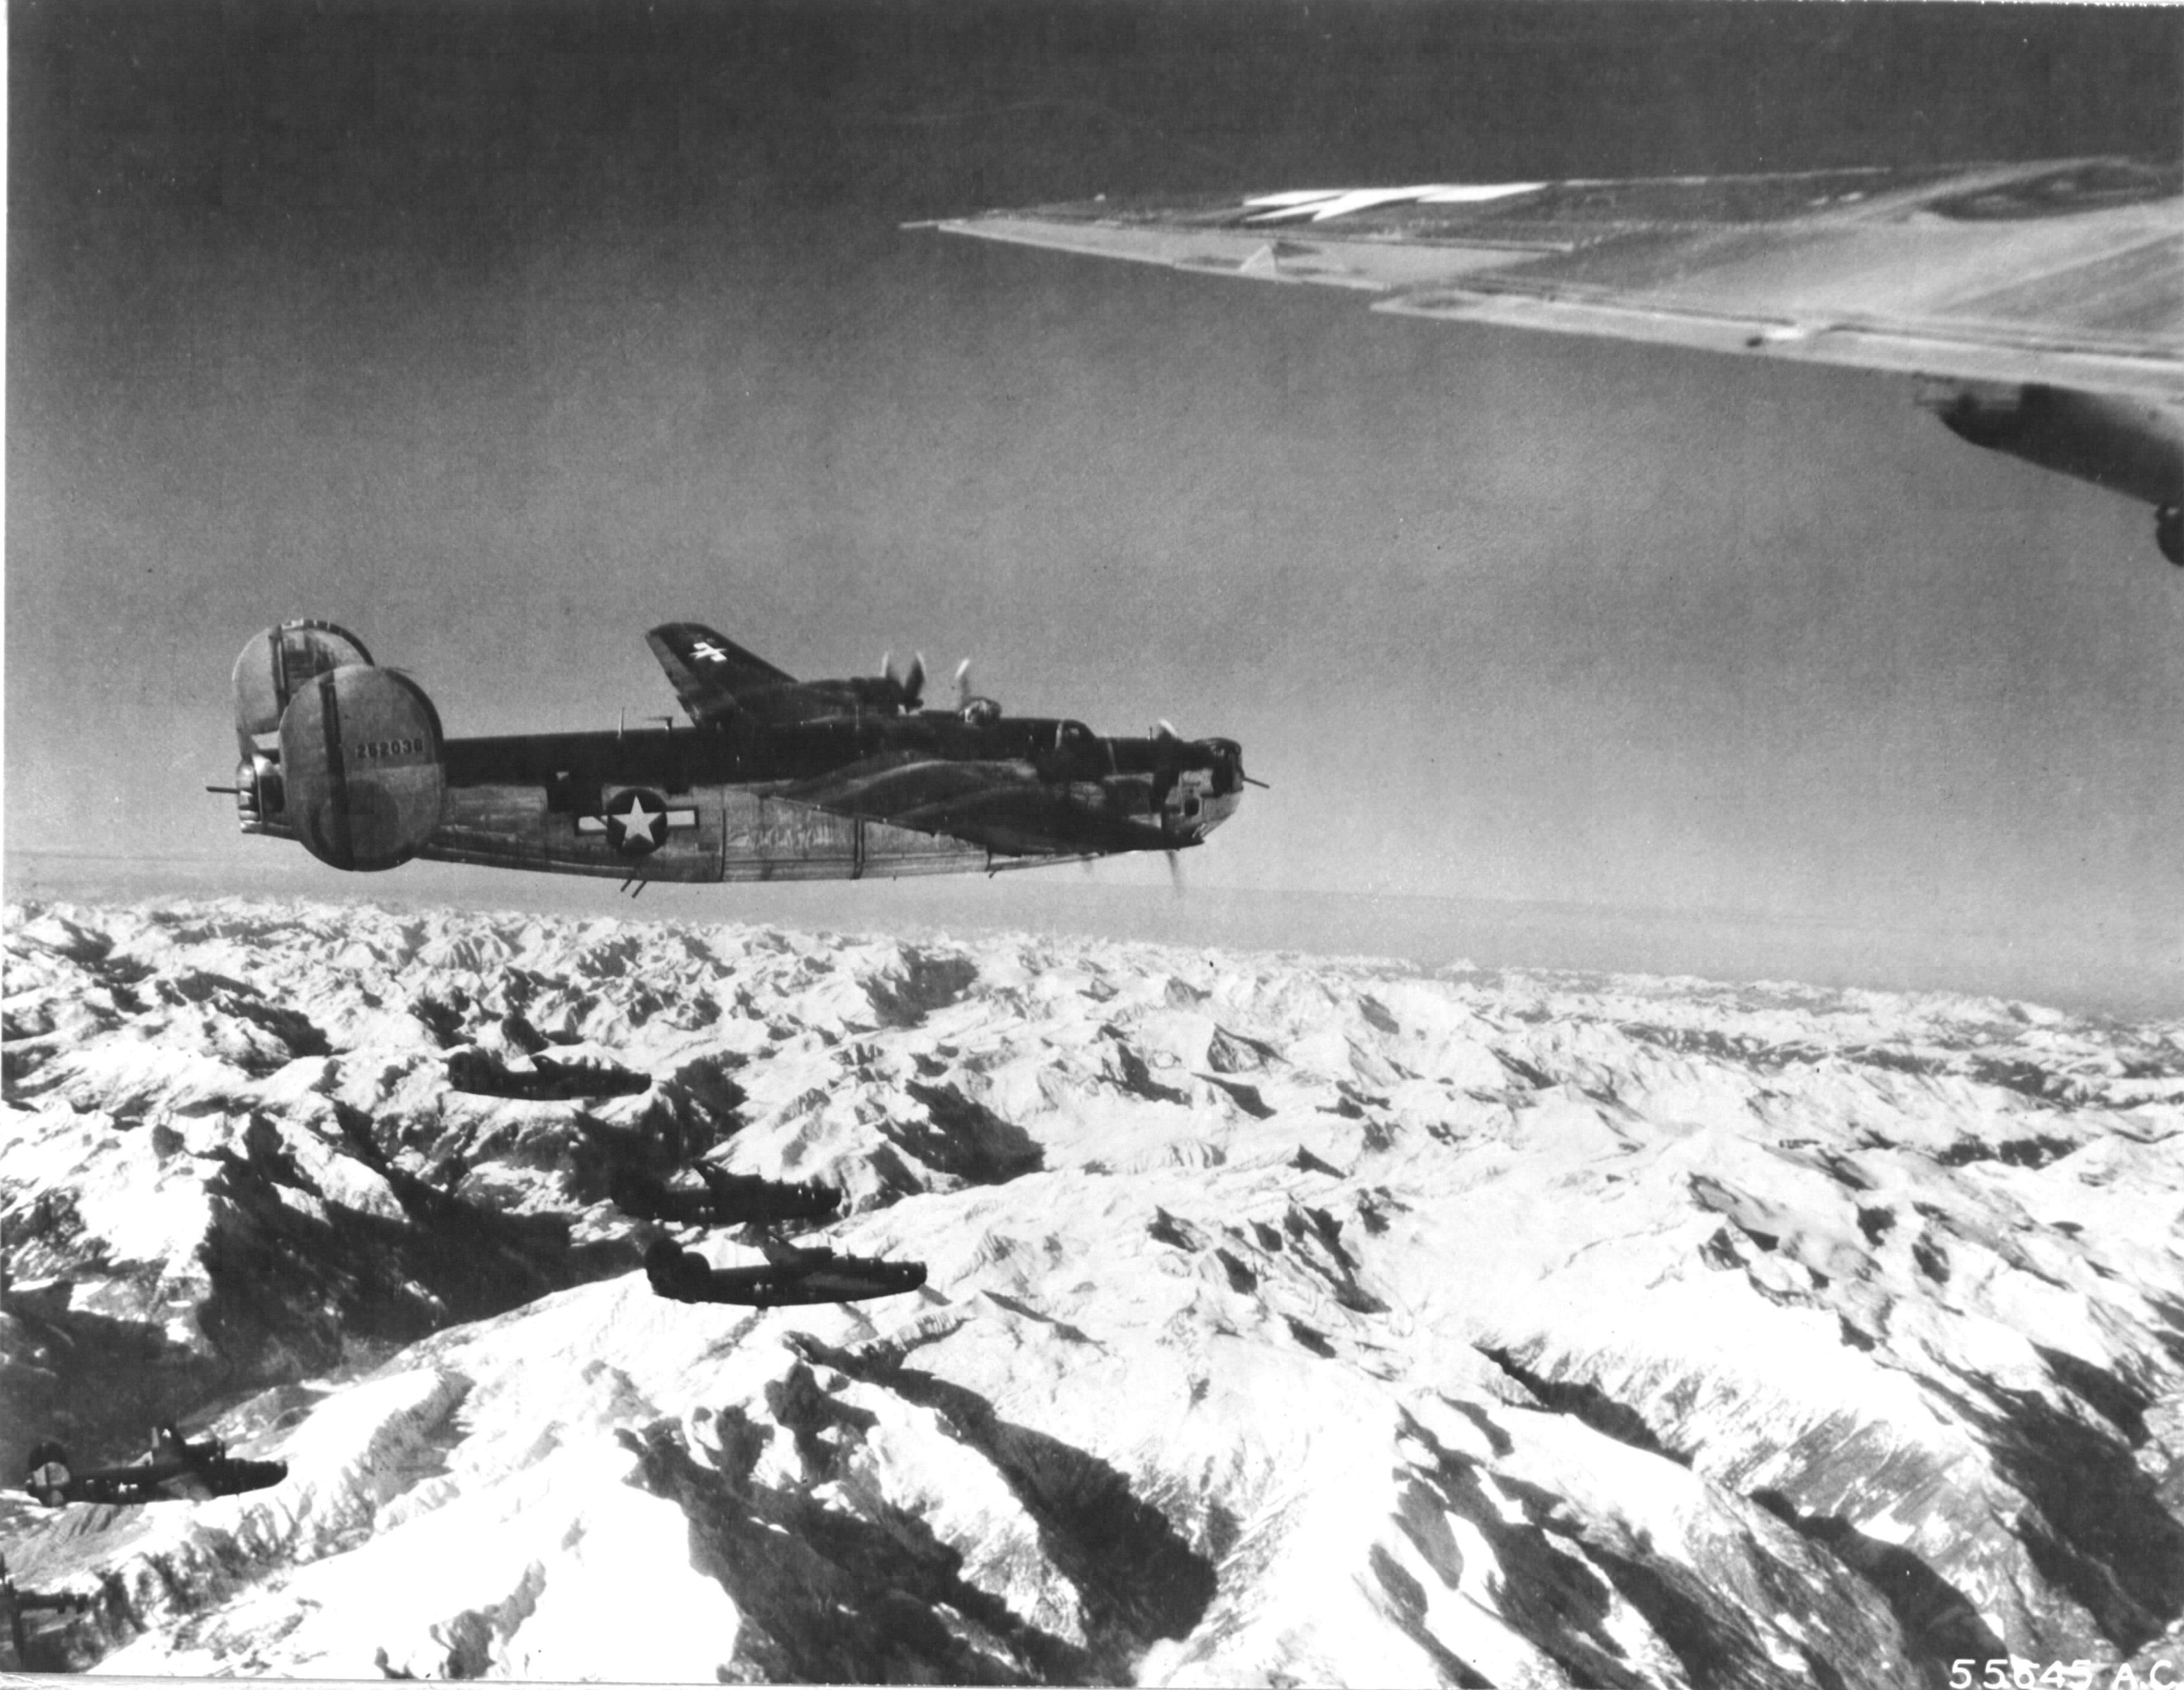 B-24J Liberators of the 451st Bomb Group en route to targets in Austria, 1944-45.